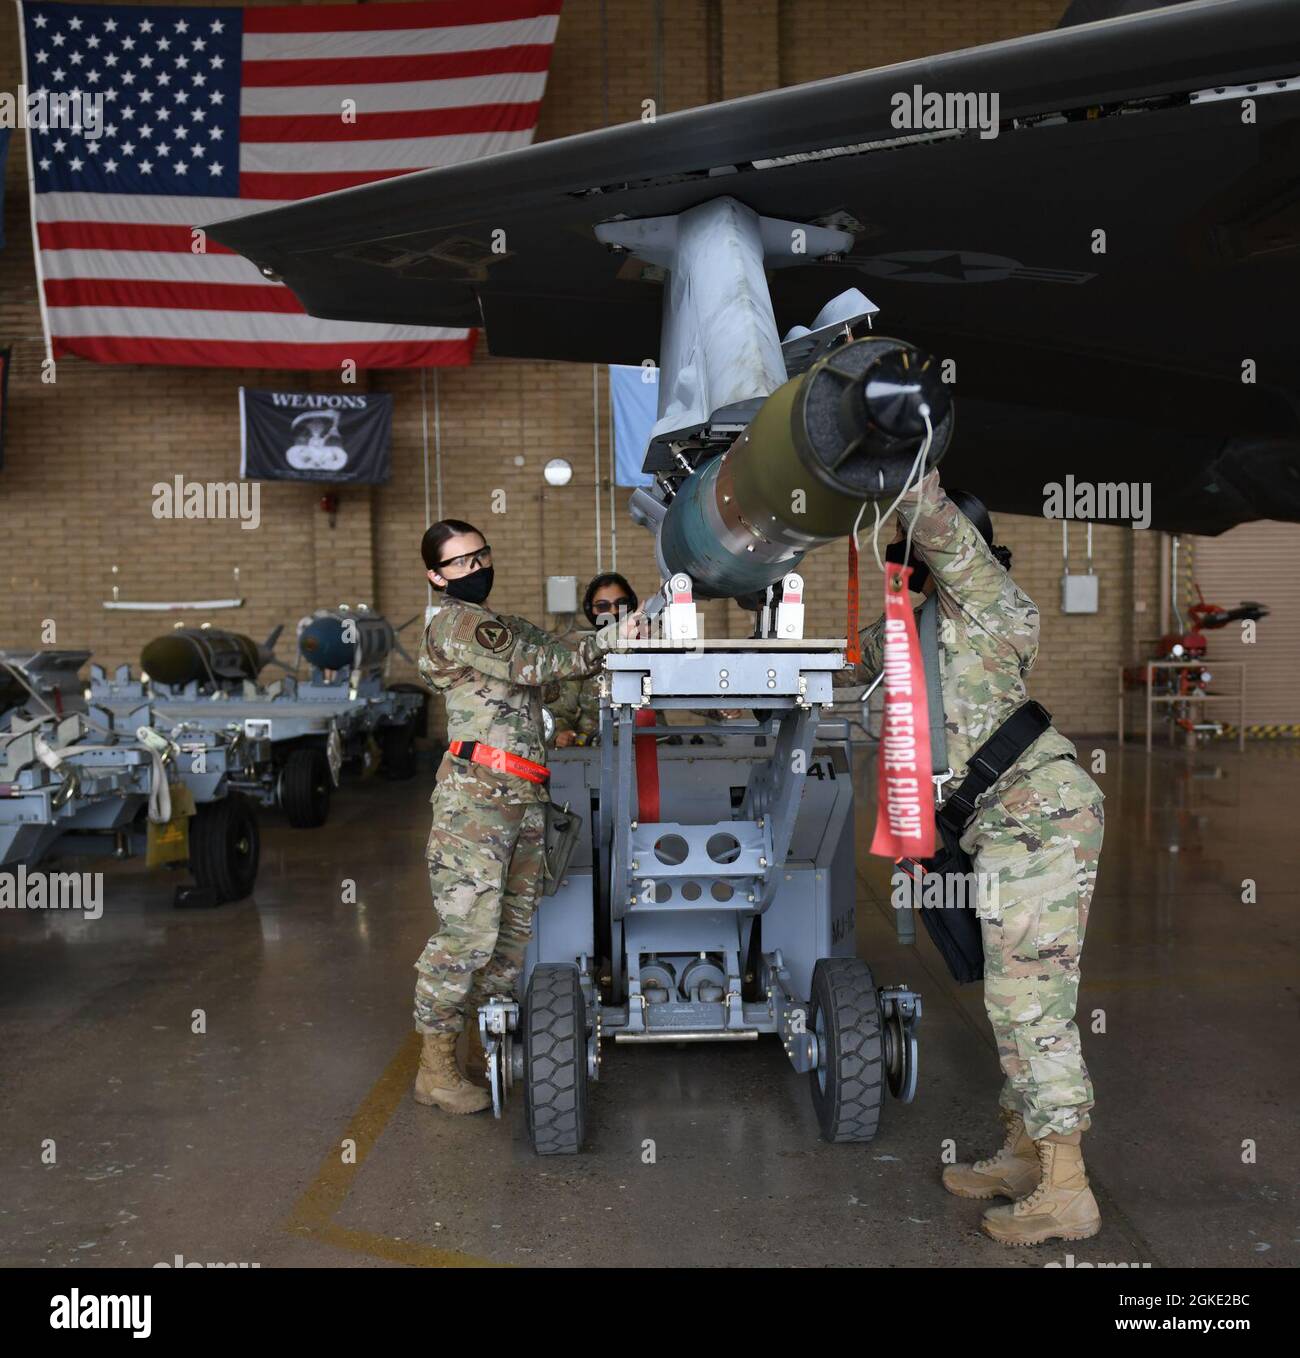 Airman 1st Class Melanie Morgan, left, 63rd Aircraft Maintenance Unit, Senior Airman Zamia Lopez, 61st AMU, and Staff Sgt. Cindy Guillen, 56th Component Maintenance Squadron, weapons load technicians, participate in the Women of Weapons Load Exhibition March 25, 2021, at Luke Air Force Base, Arizona. The team loaded a GBU-12 Paveway II laser-guided bomb on an F-35A Lightning II as part of a Women’s History Month event. Diversity allows the Air Force to capitalize on all available talent by enabling a culture of inclusion. Stock Photo